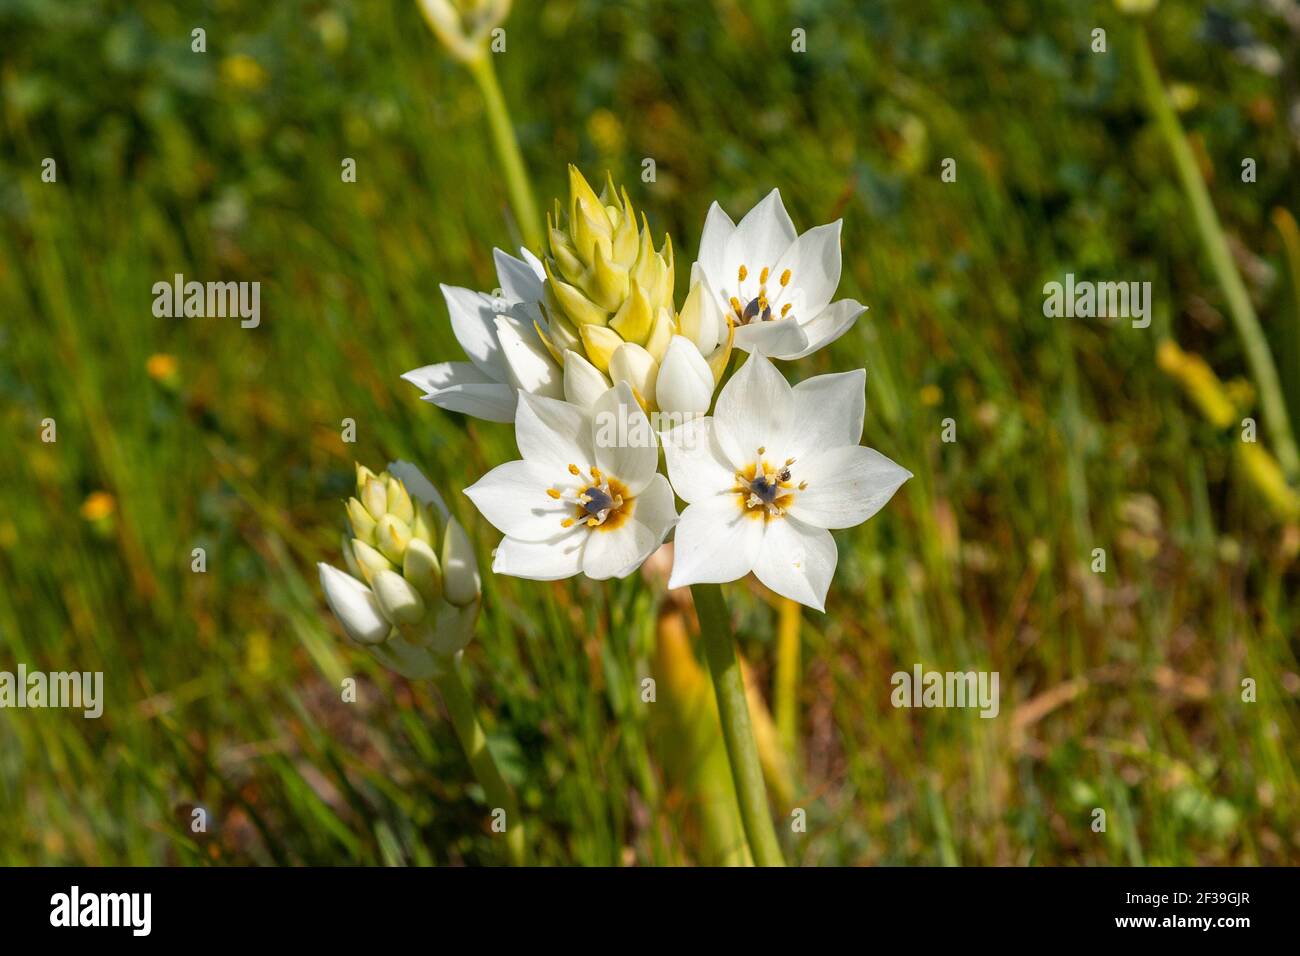 Close-up of the white flowers of an Ornithogalum sp. seen in natural habitat close to Darling in the Western Cape of South Africa Stock Photo